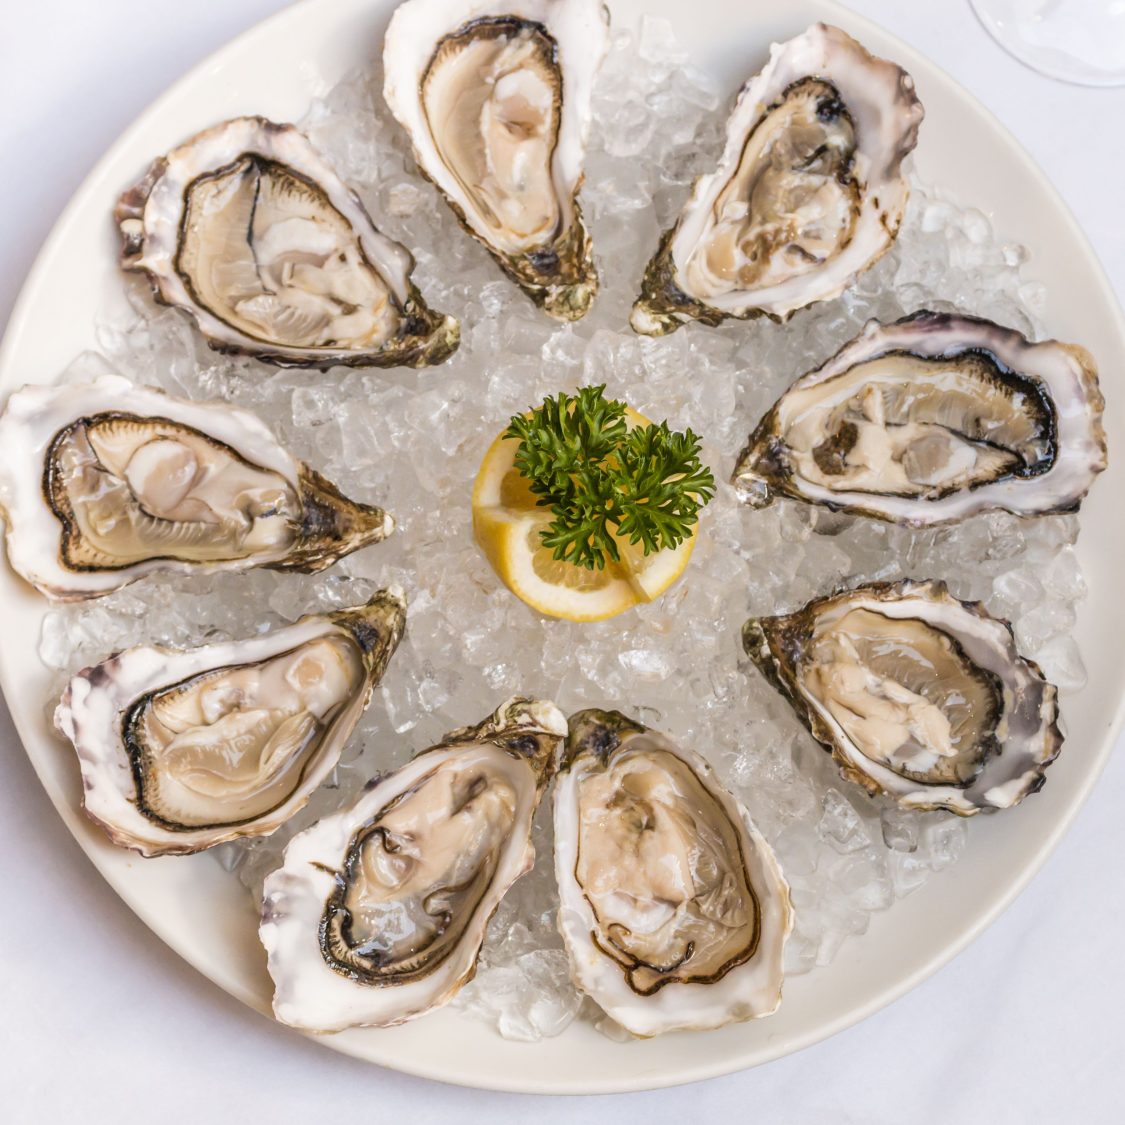 Get All The Health Benefits By Including Oysters In Your Diet